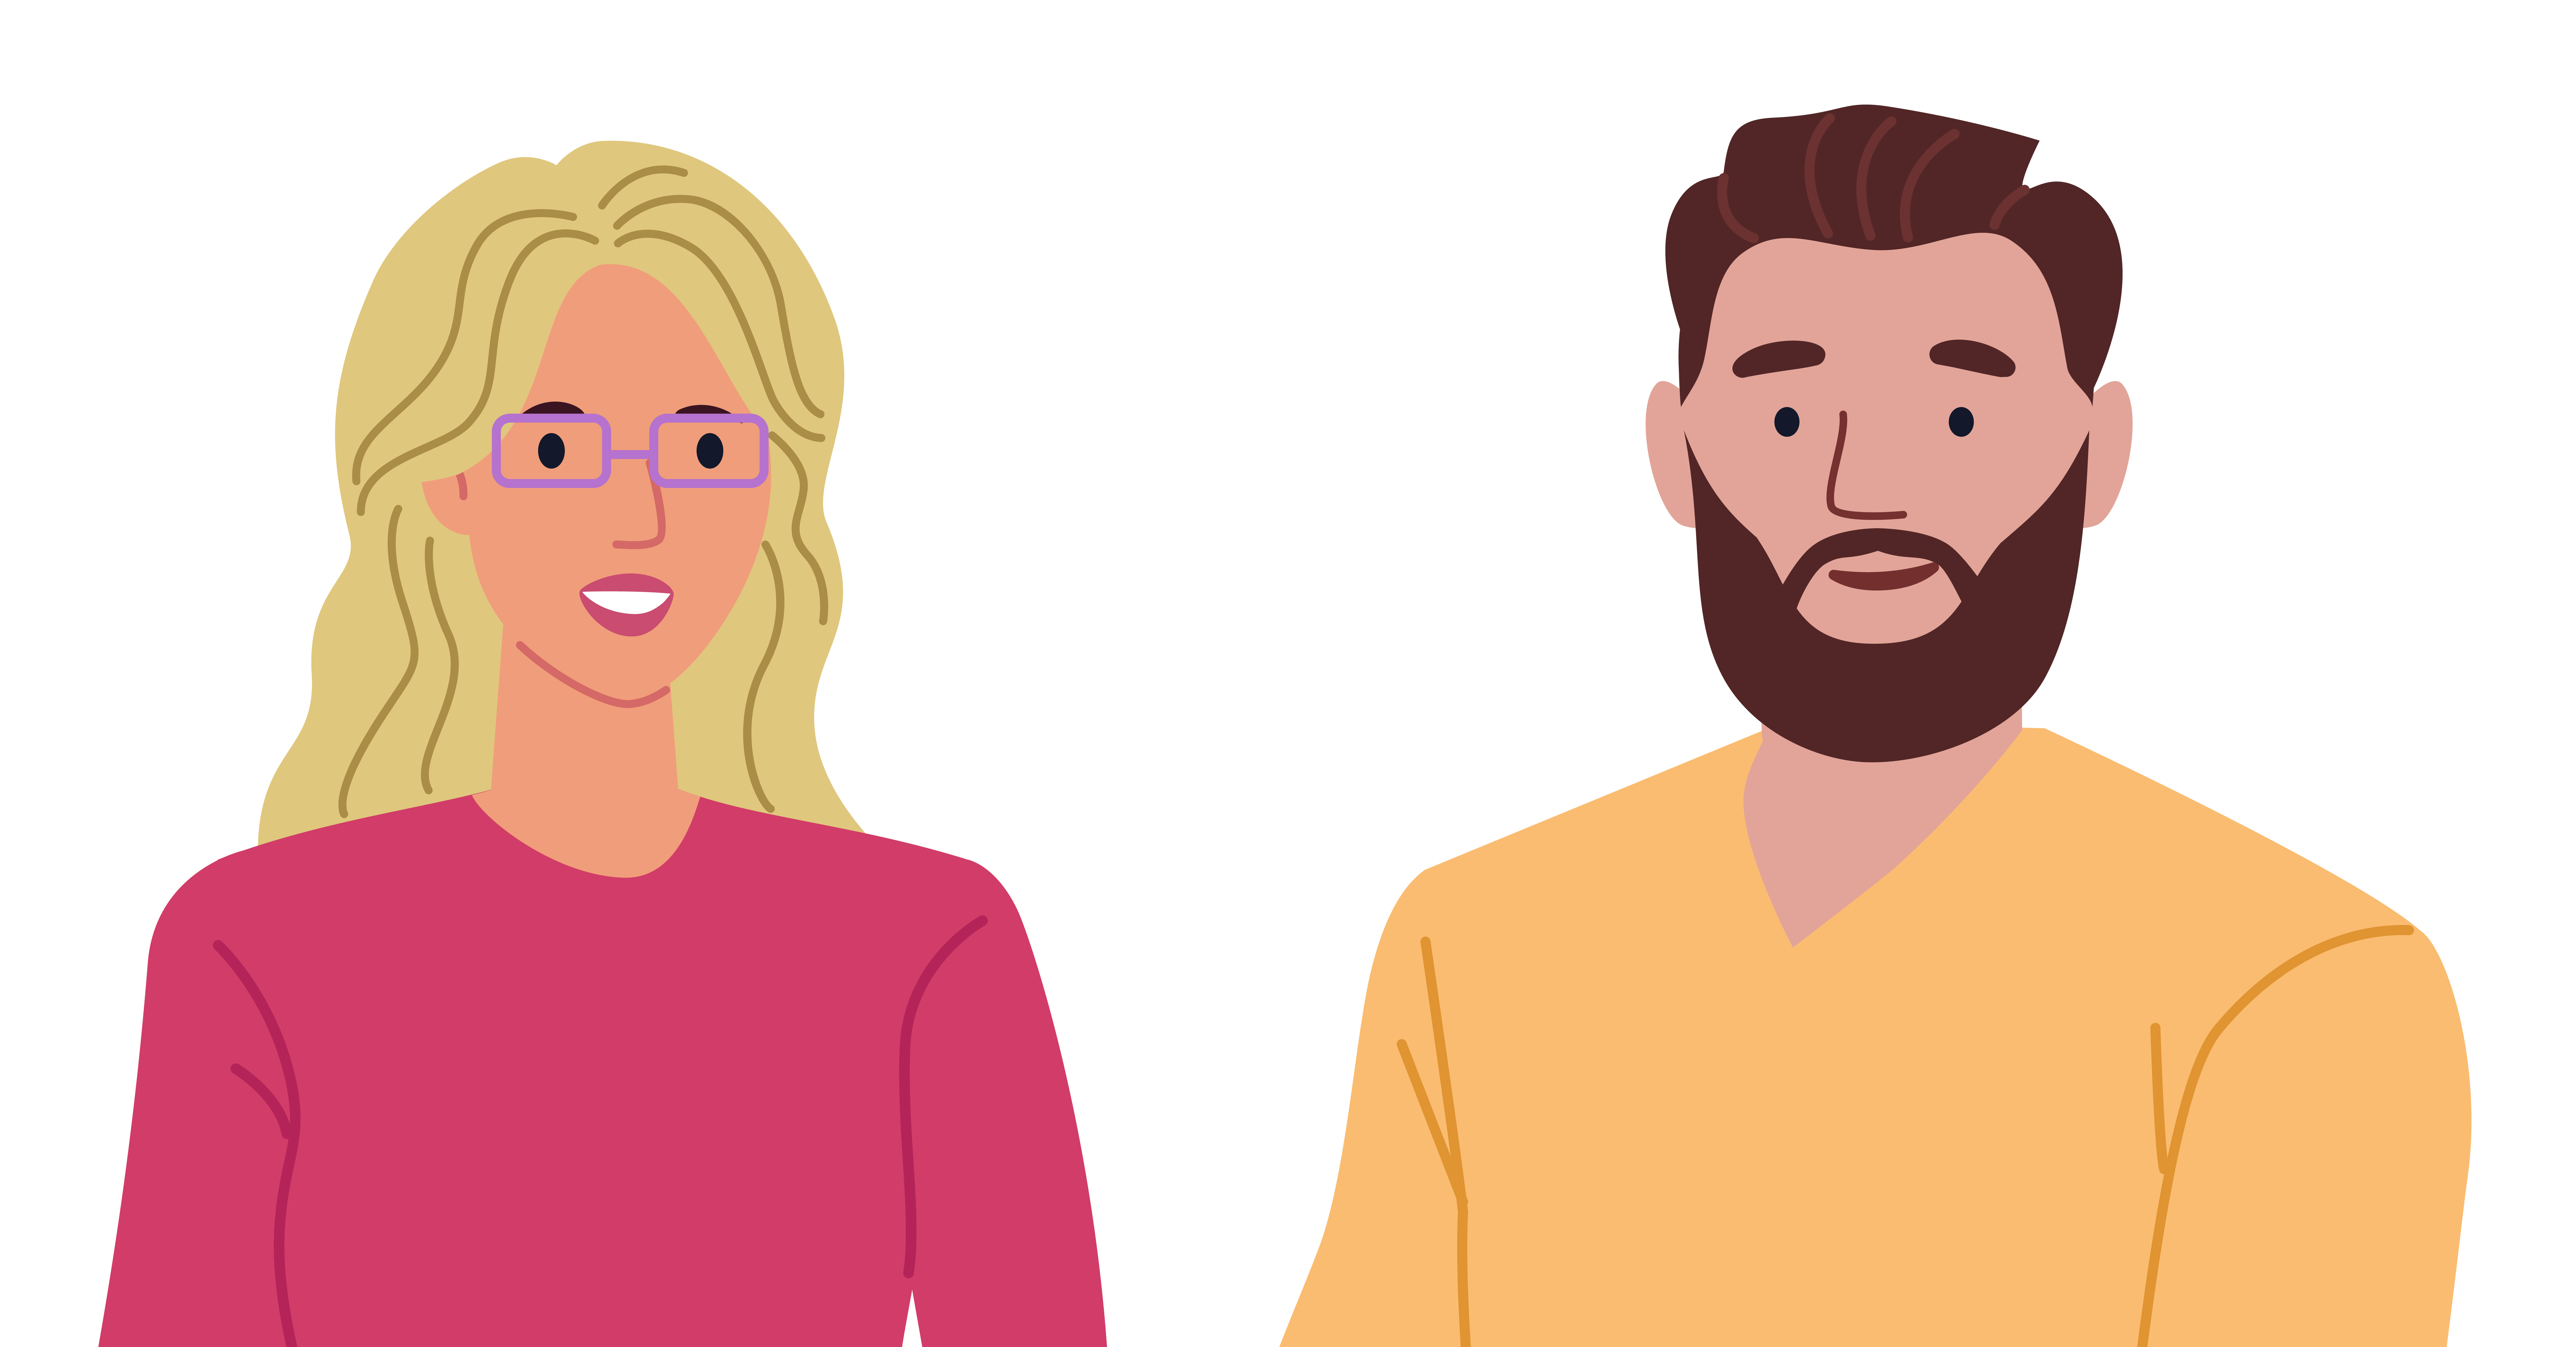 Illustration of blonde lady with glasses and dark haired man with beard